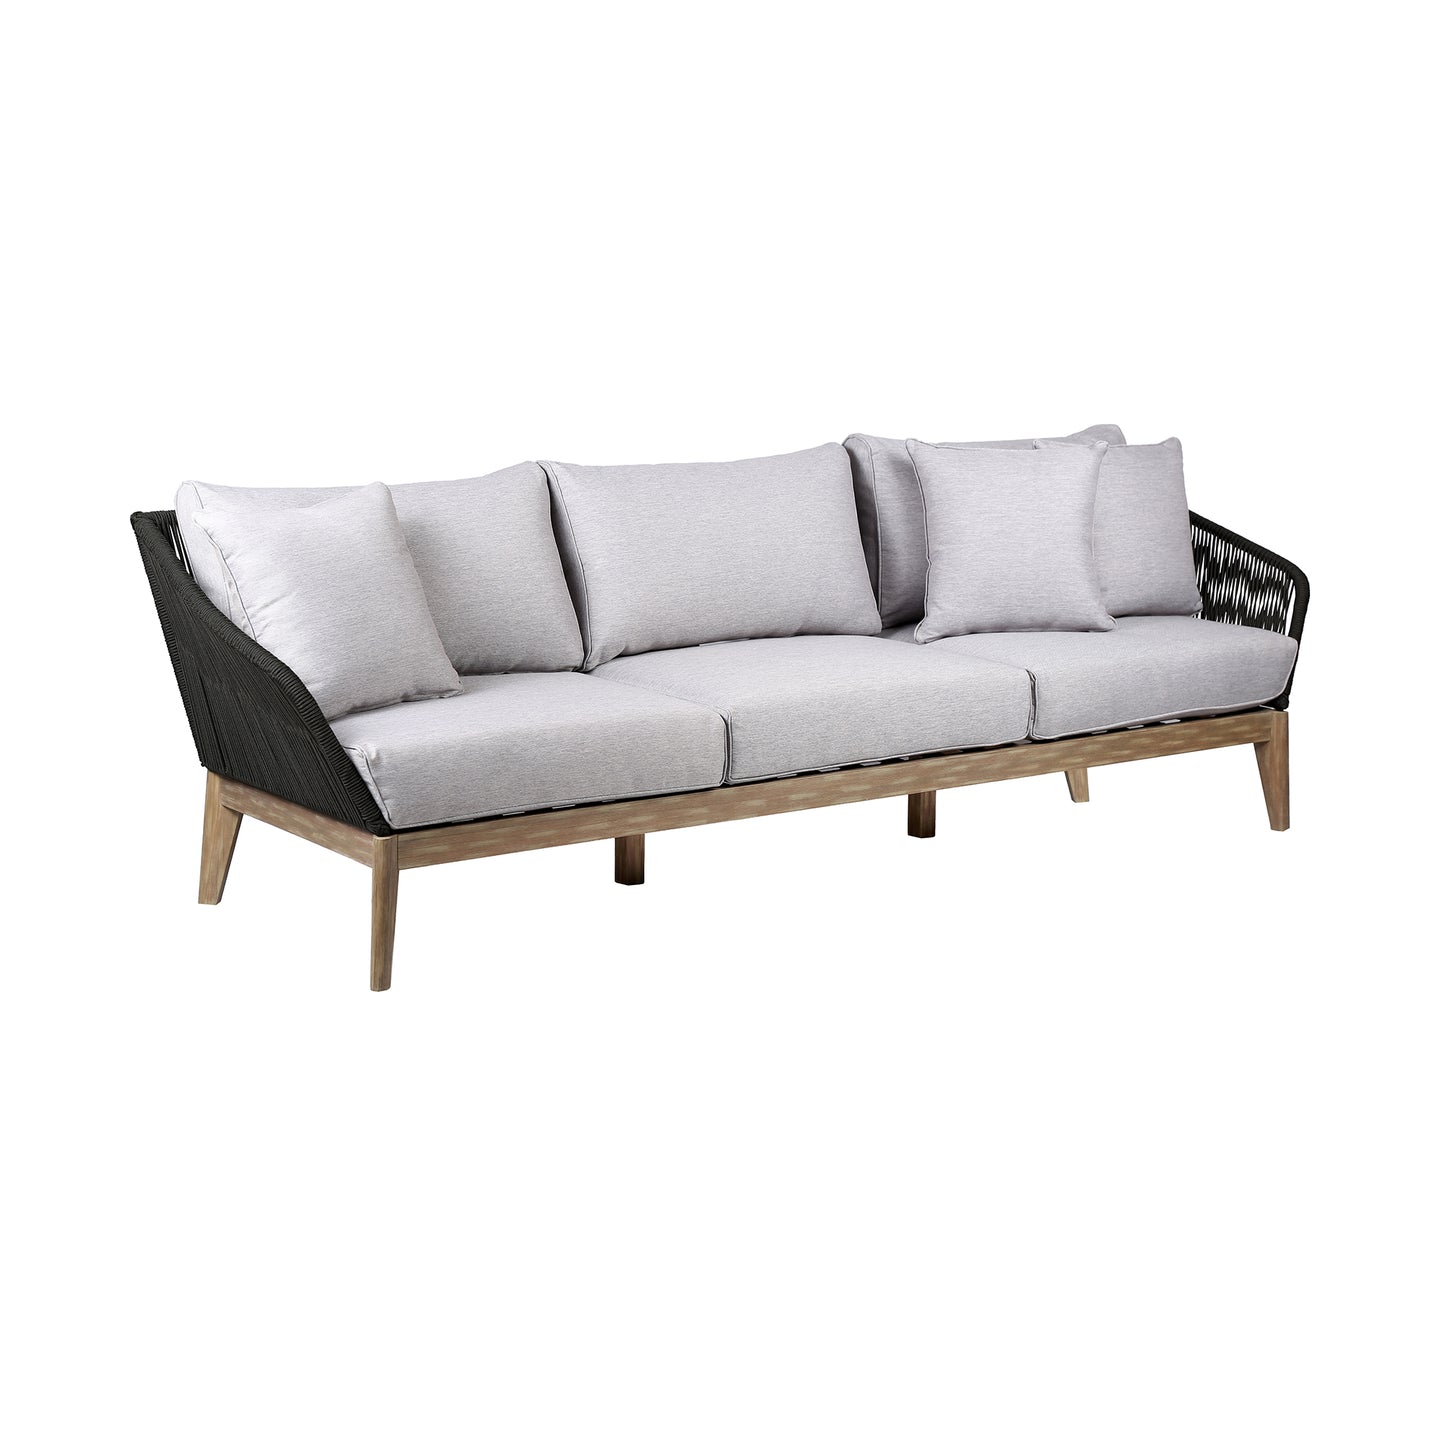 Athos Indoor Outdoor 3 Seater Sofa in Light Eucalyptus Wood with Charcoal Rope and Gray Cushions